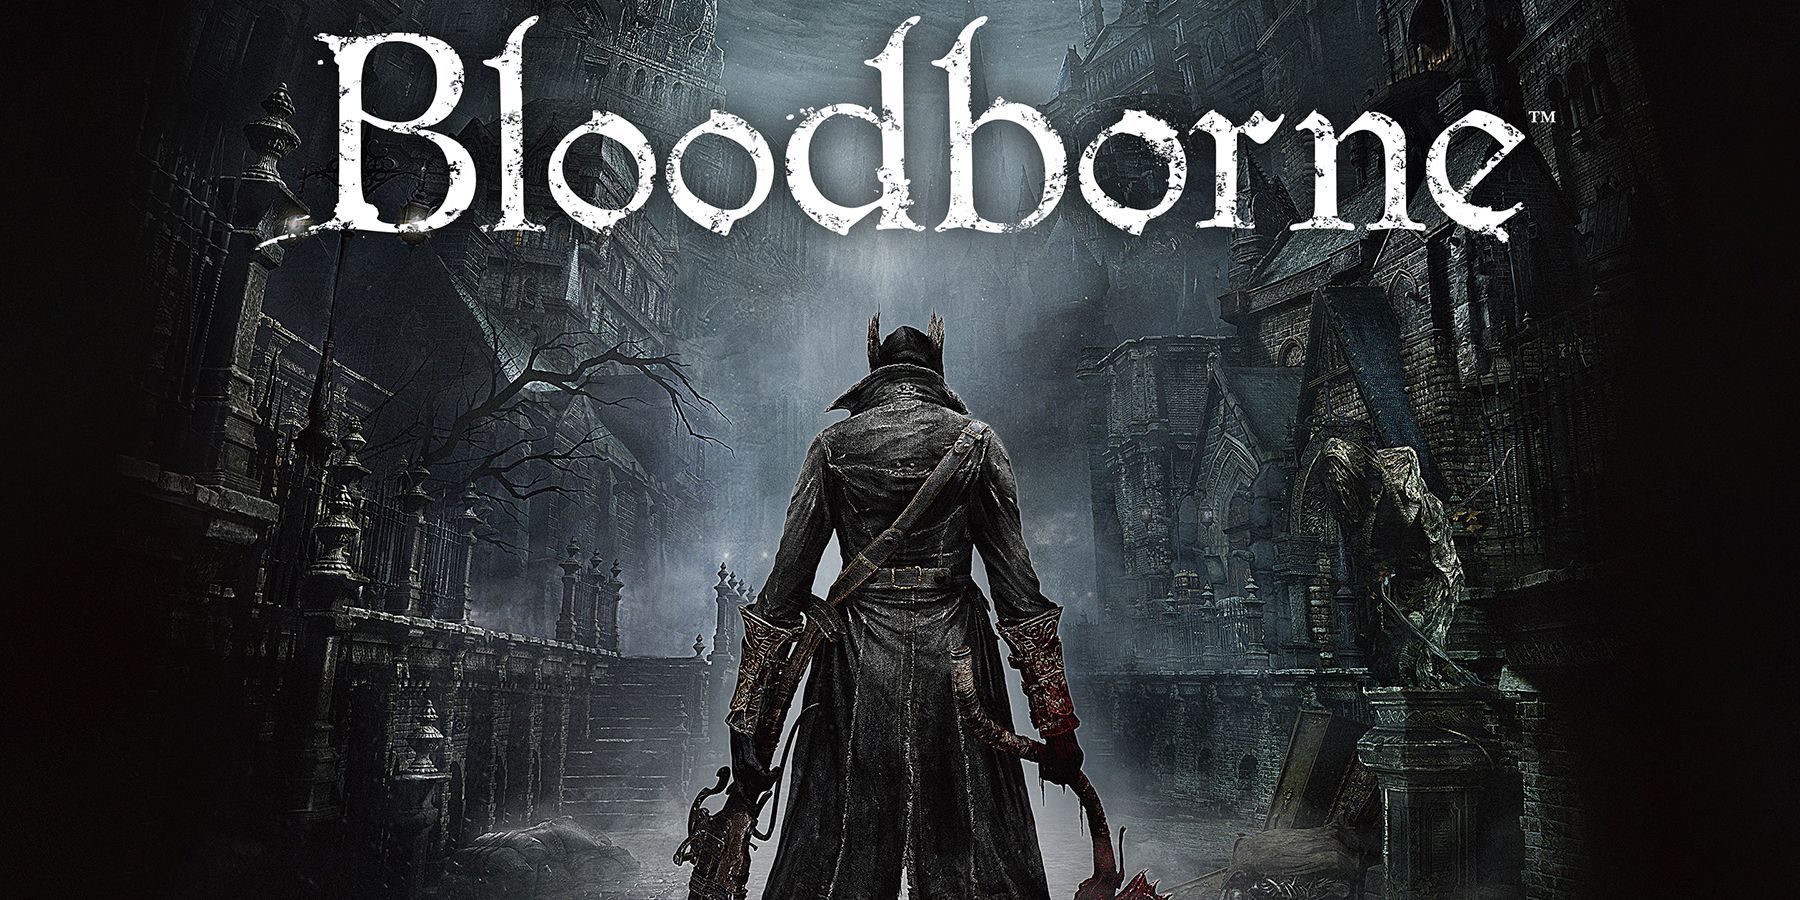 Bloodborne Evidence of the PC version